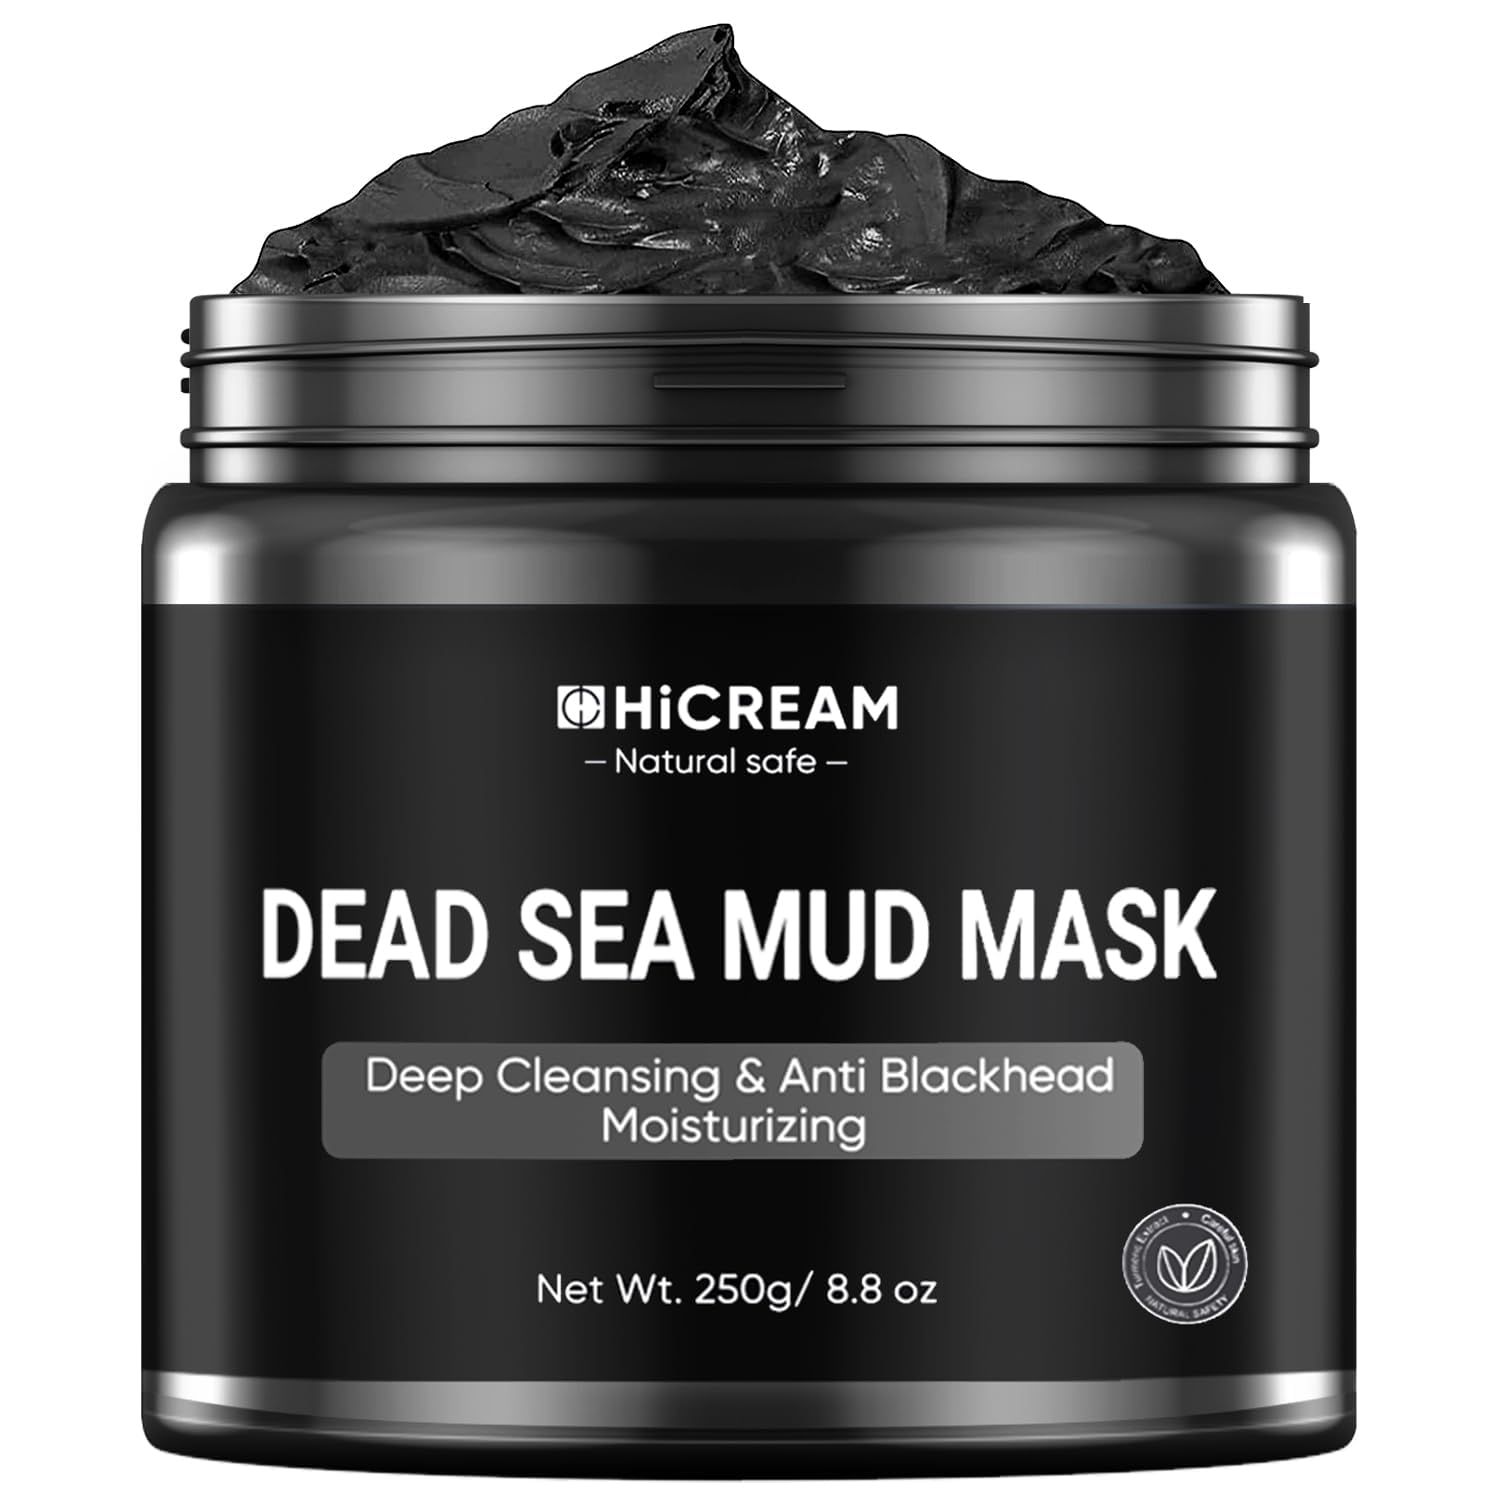 Hicream Dead Sea Mud Mask for Face and Body – Natural Face and Skin Care